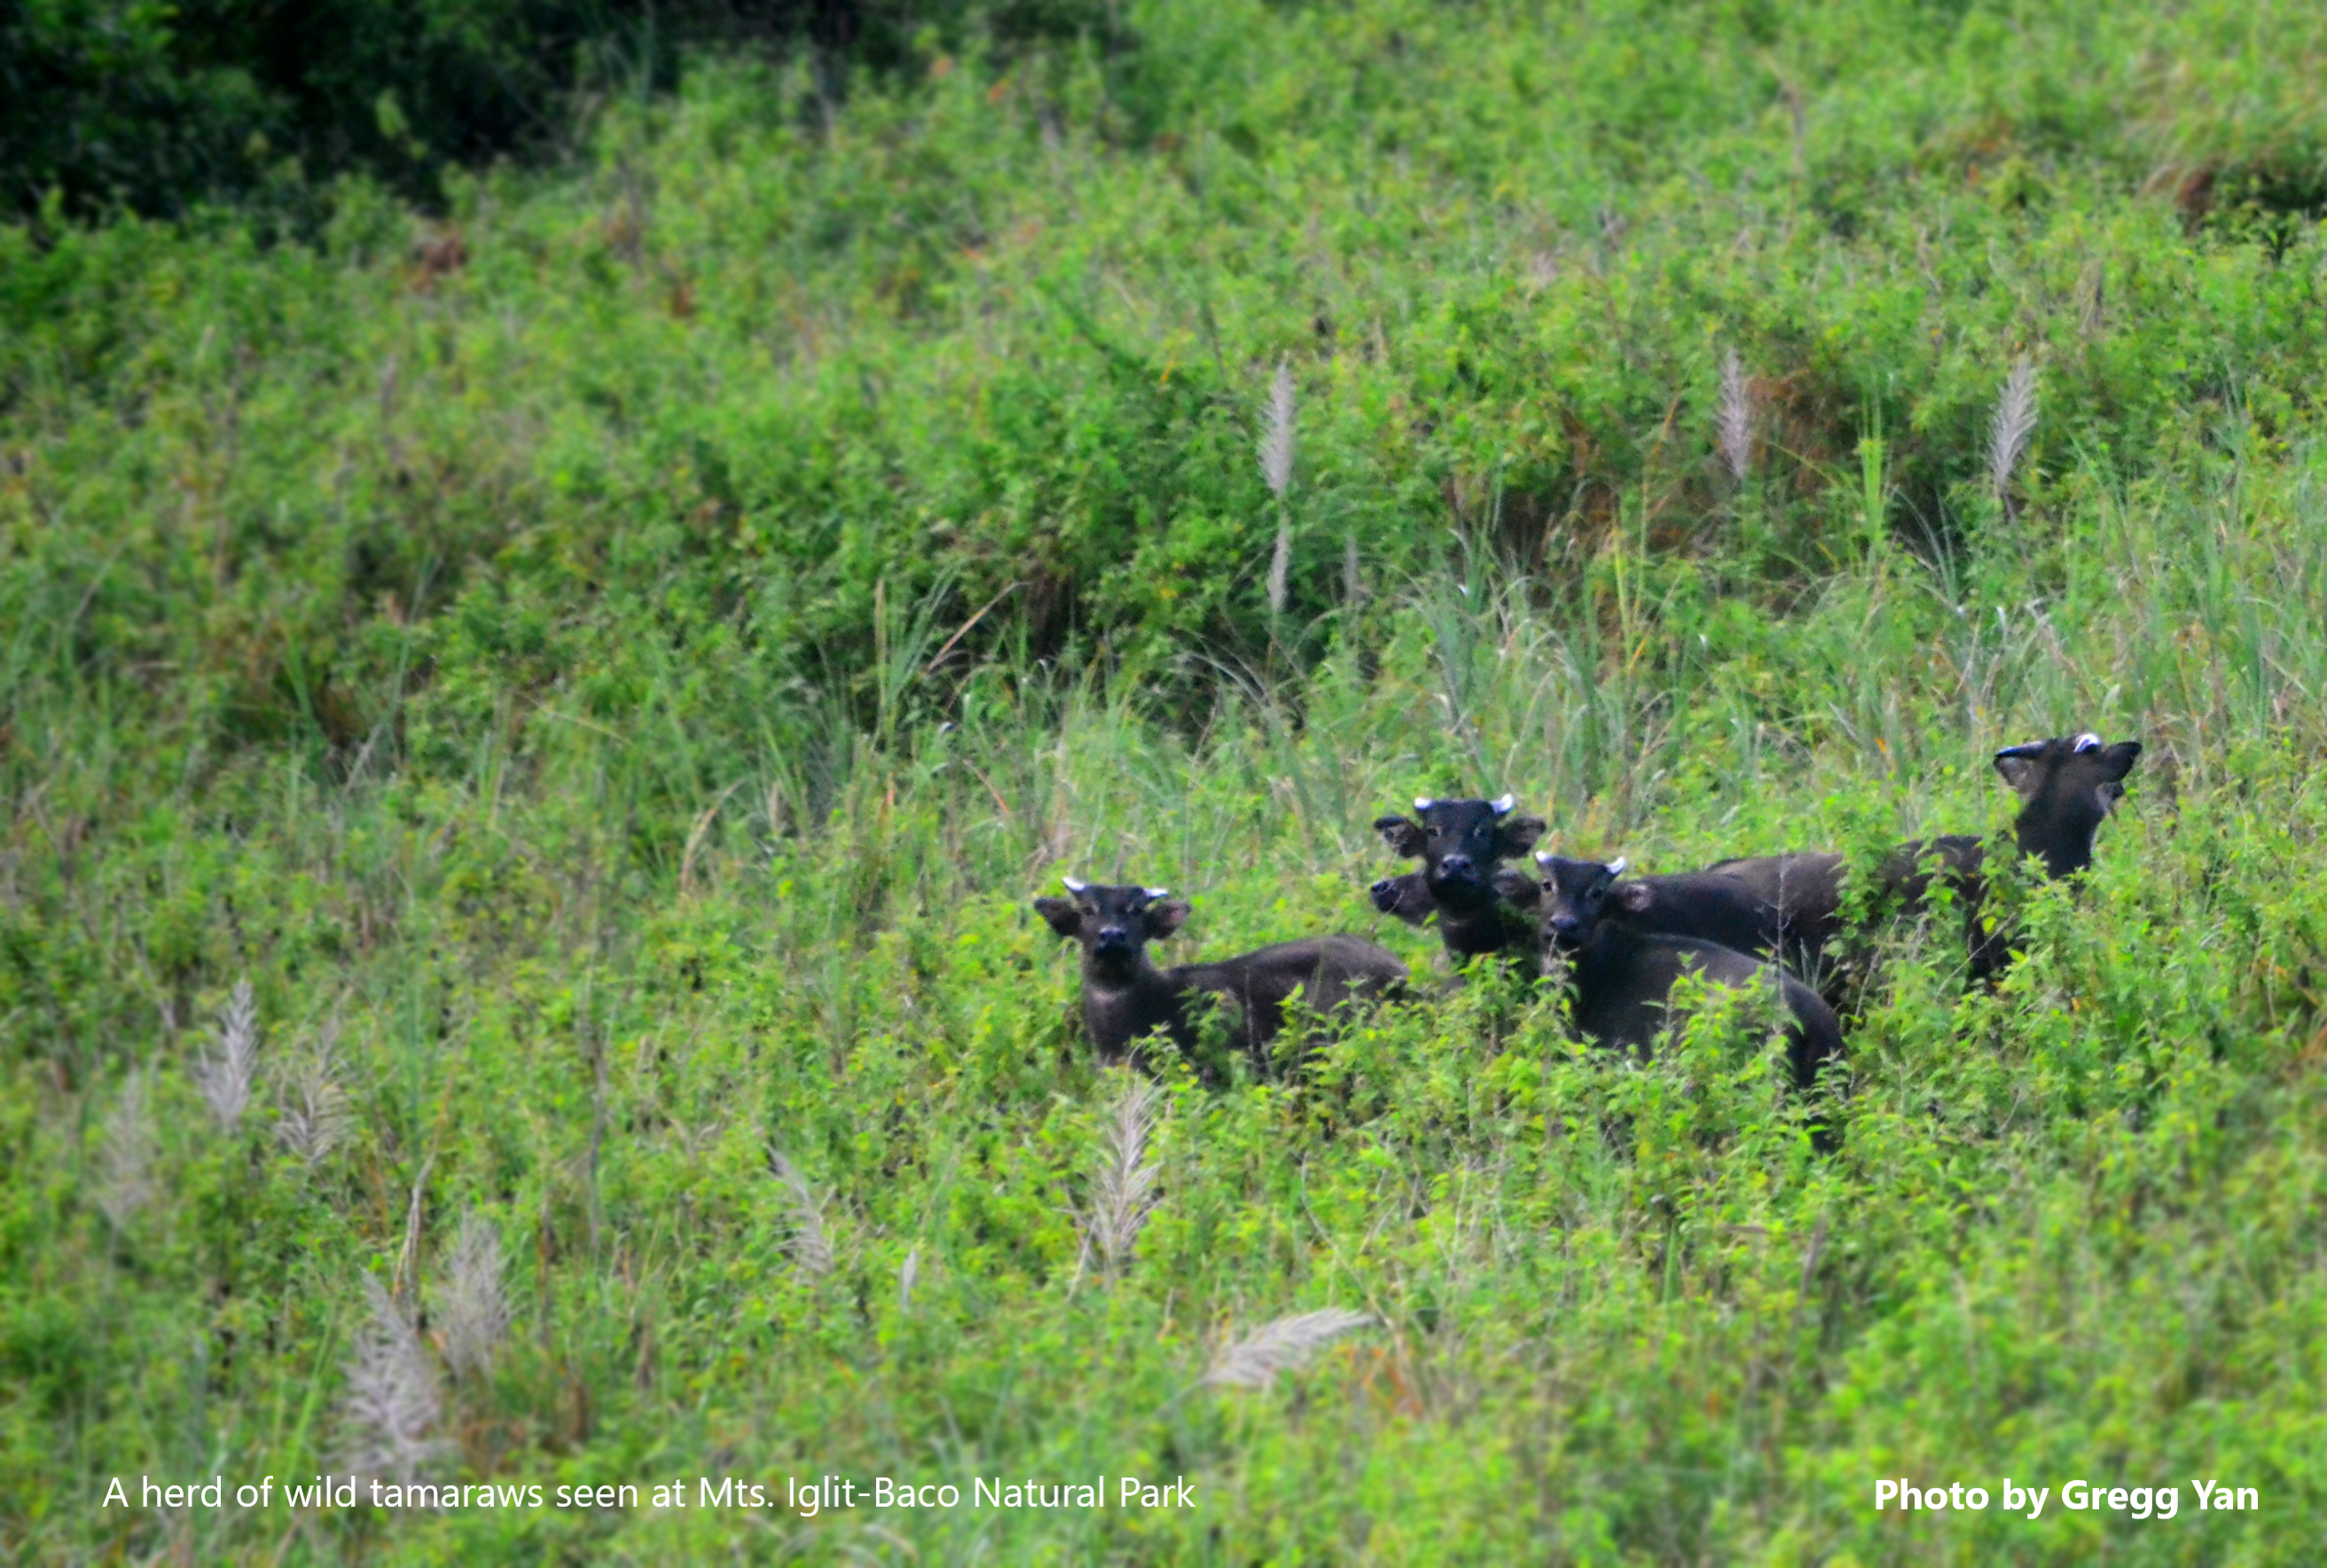 A herd of tamaraws seen in the wild at Mts. Iglit-Baco Natural Park. Photo by Gregg Yan